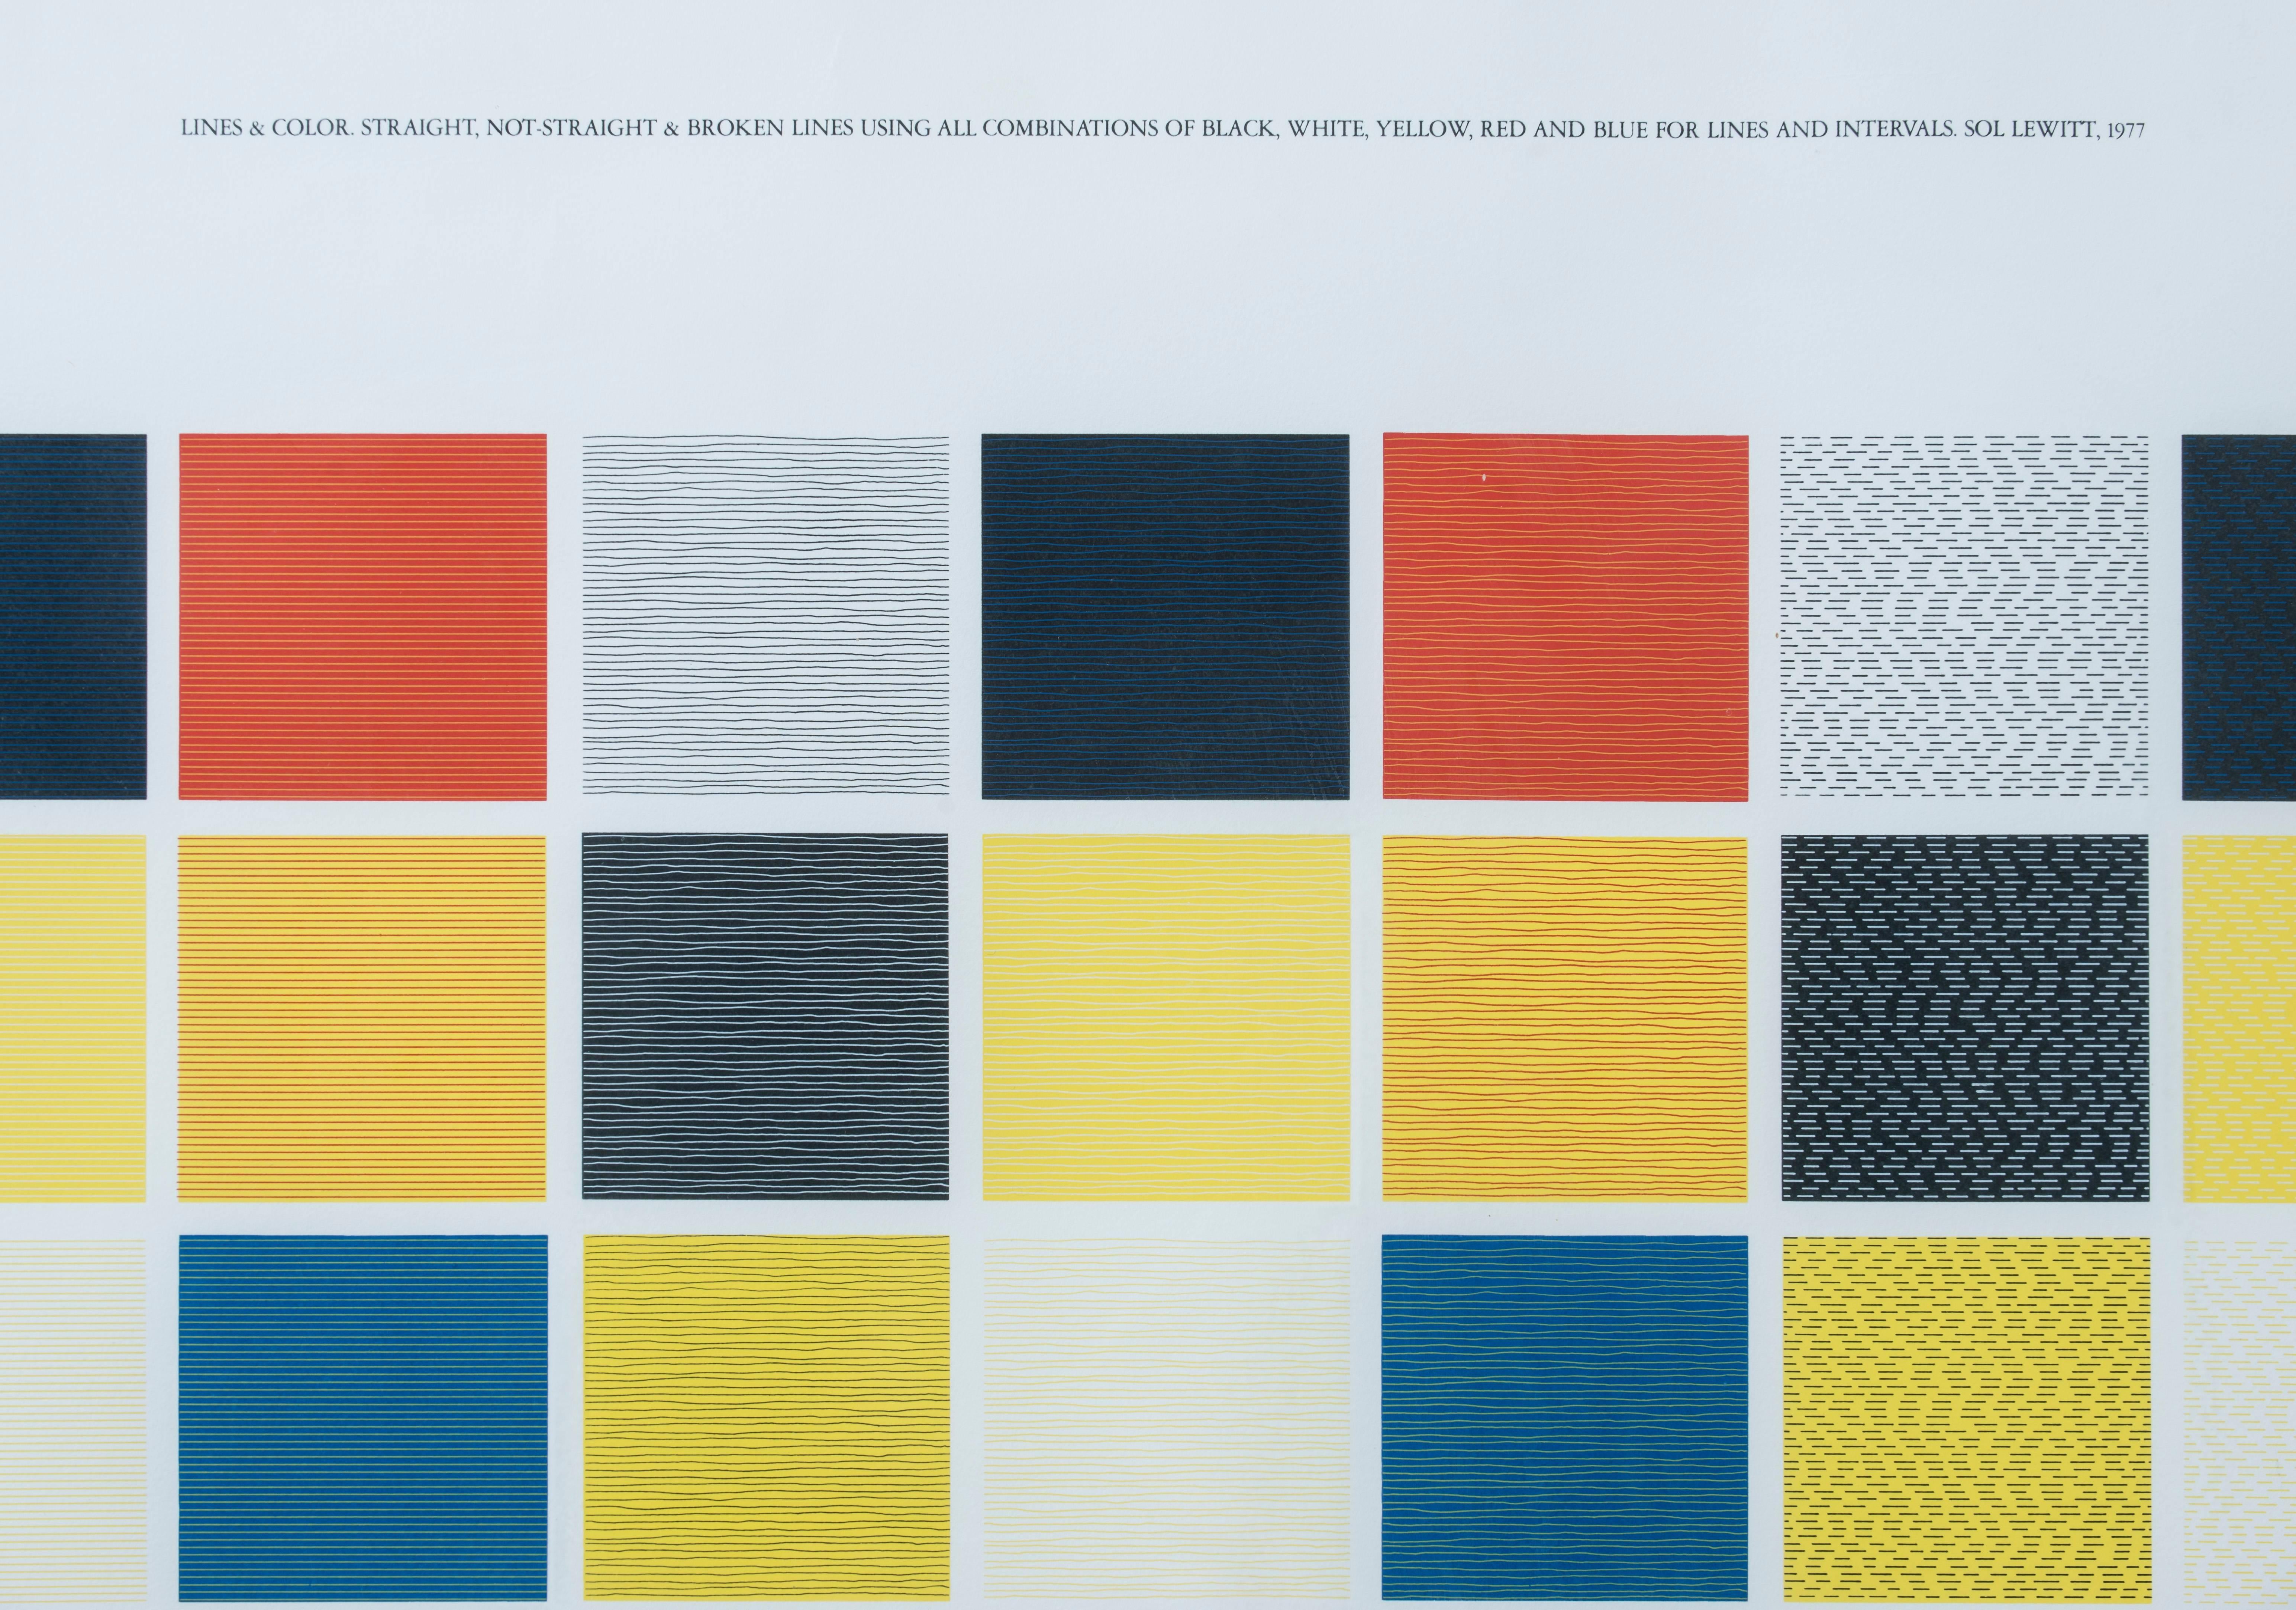 Lines and color, straight, not-straight and broken lines using combinations of black, white, yellow, red and blue for lines and intervals by Sol Lewitt, is an edition of 50, with 15 artist proofs. AP edition 5/15 is available. Signed and numbered on